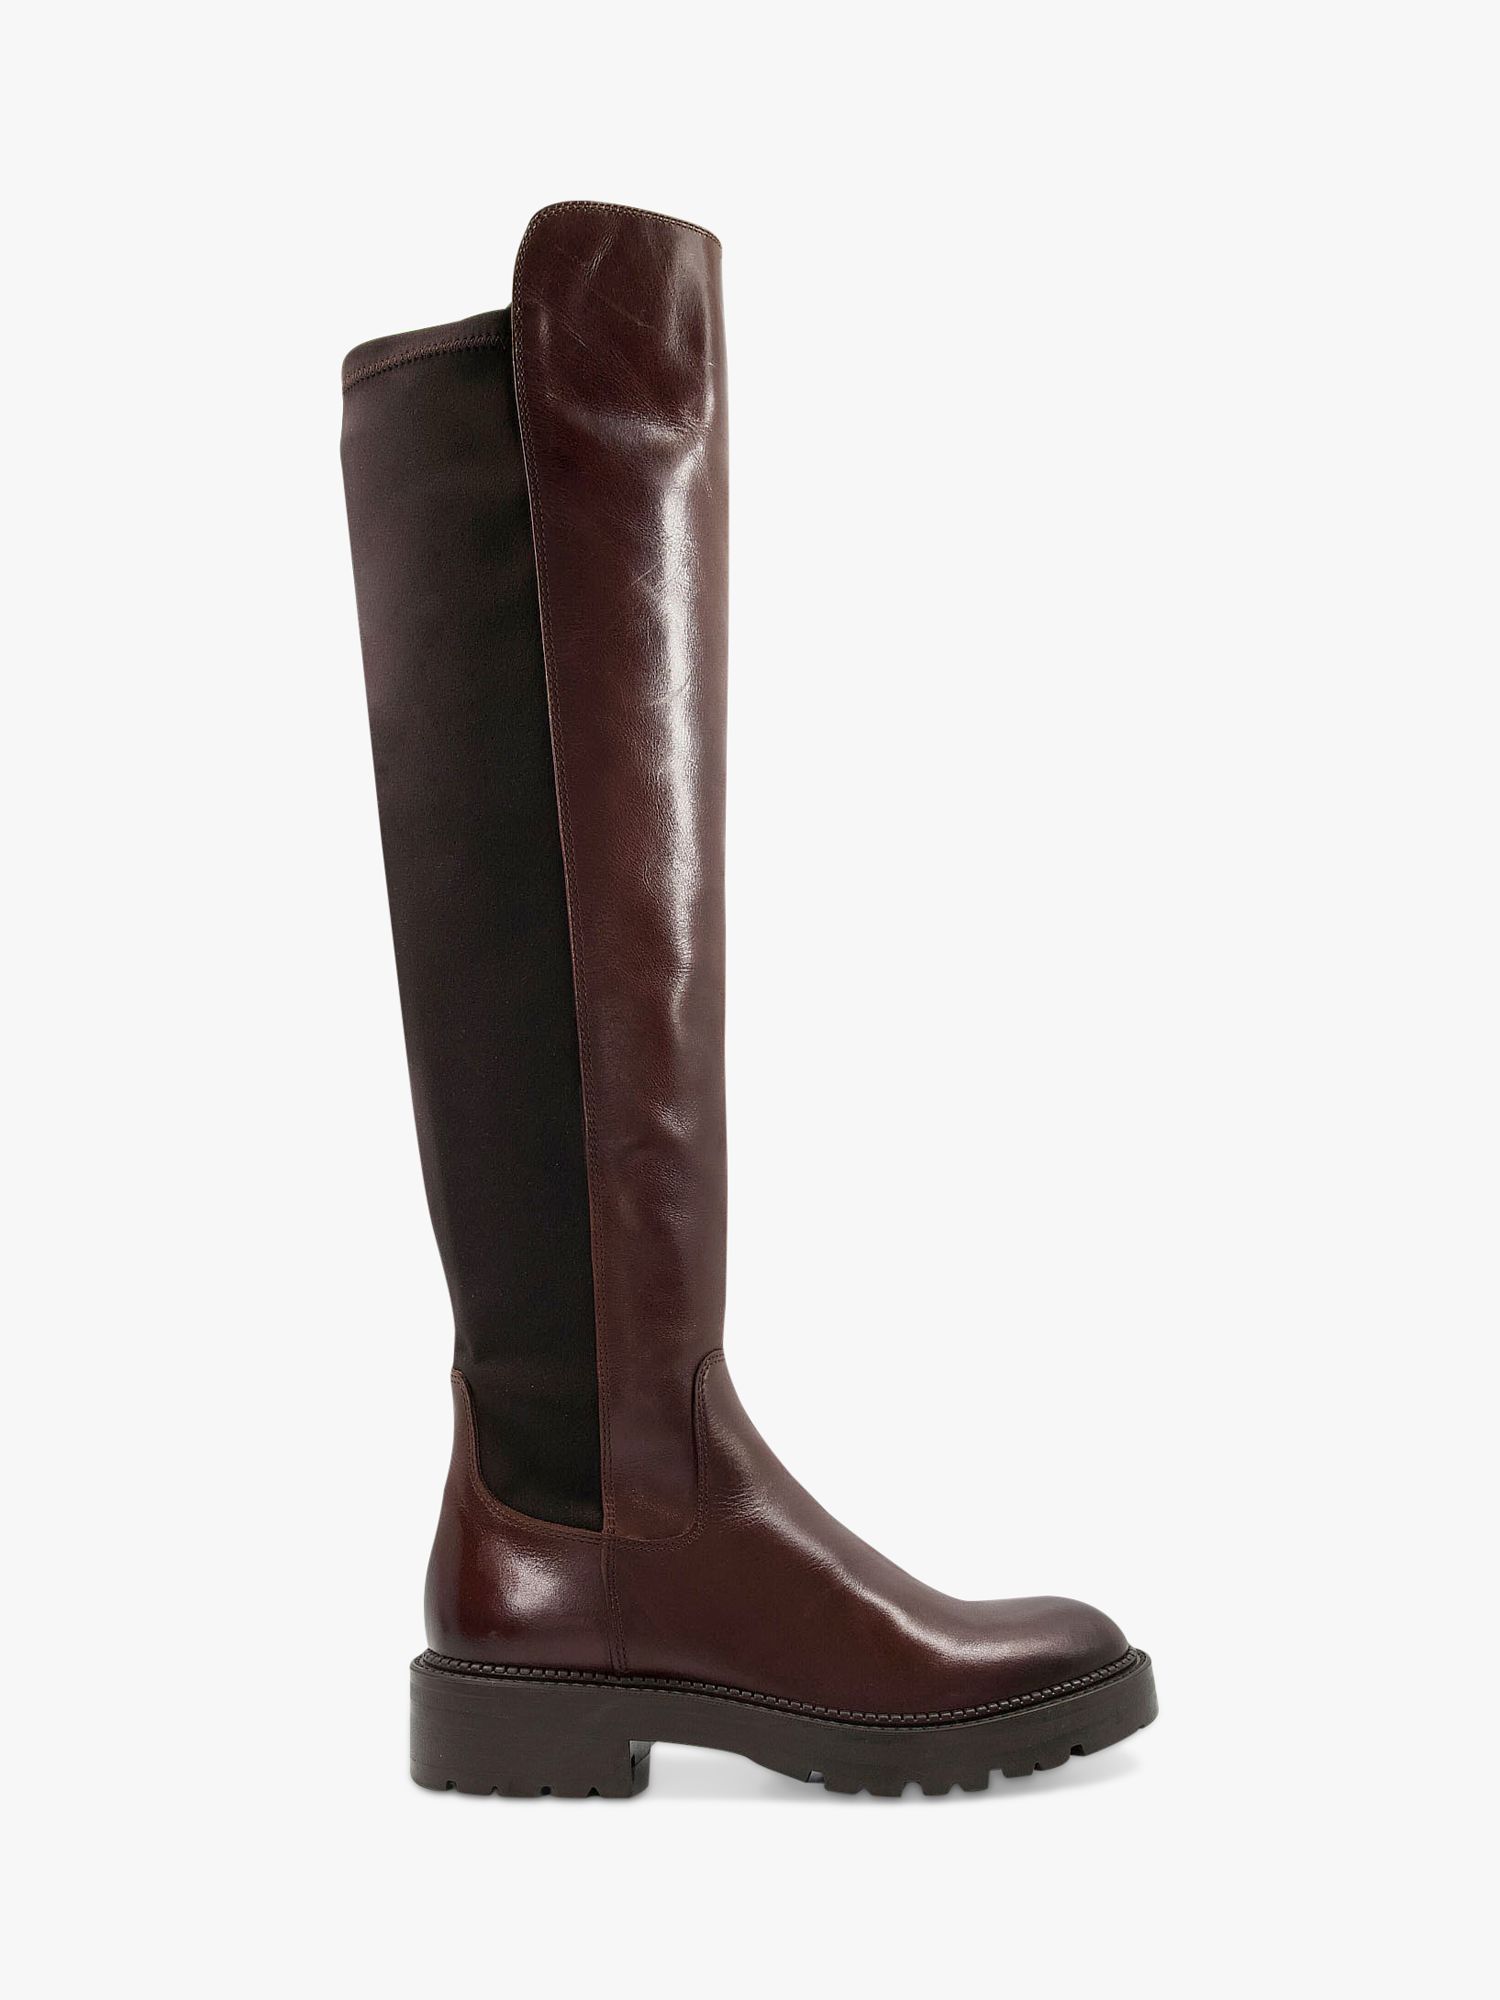 Dune Tella Leather Knee High Boots, Brown, 3